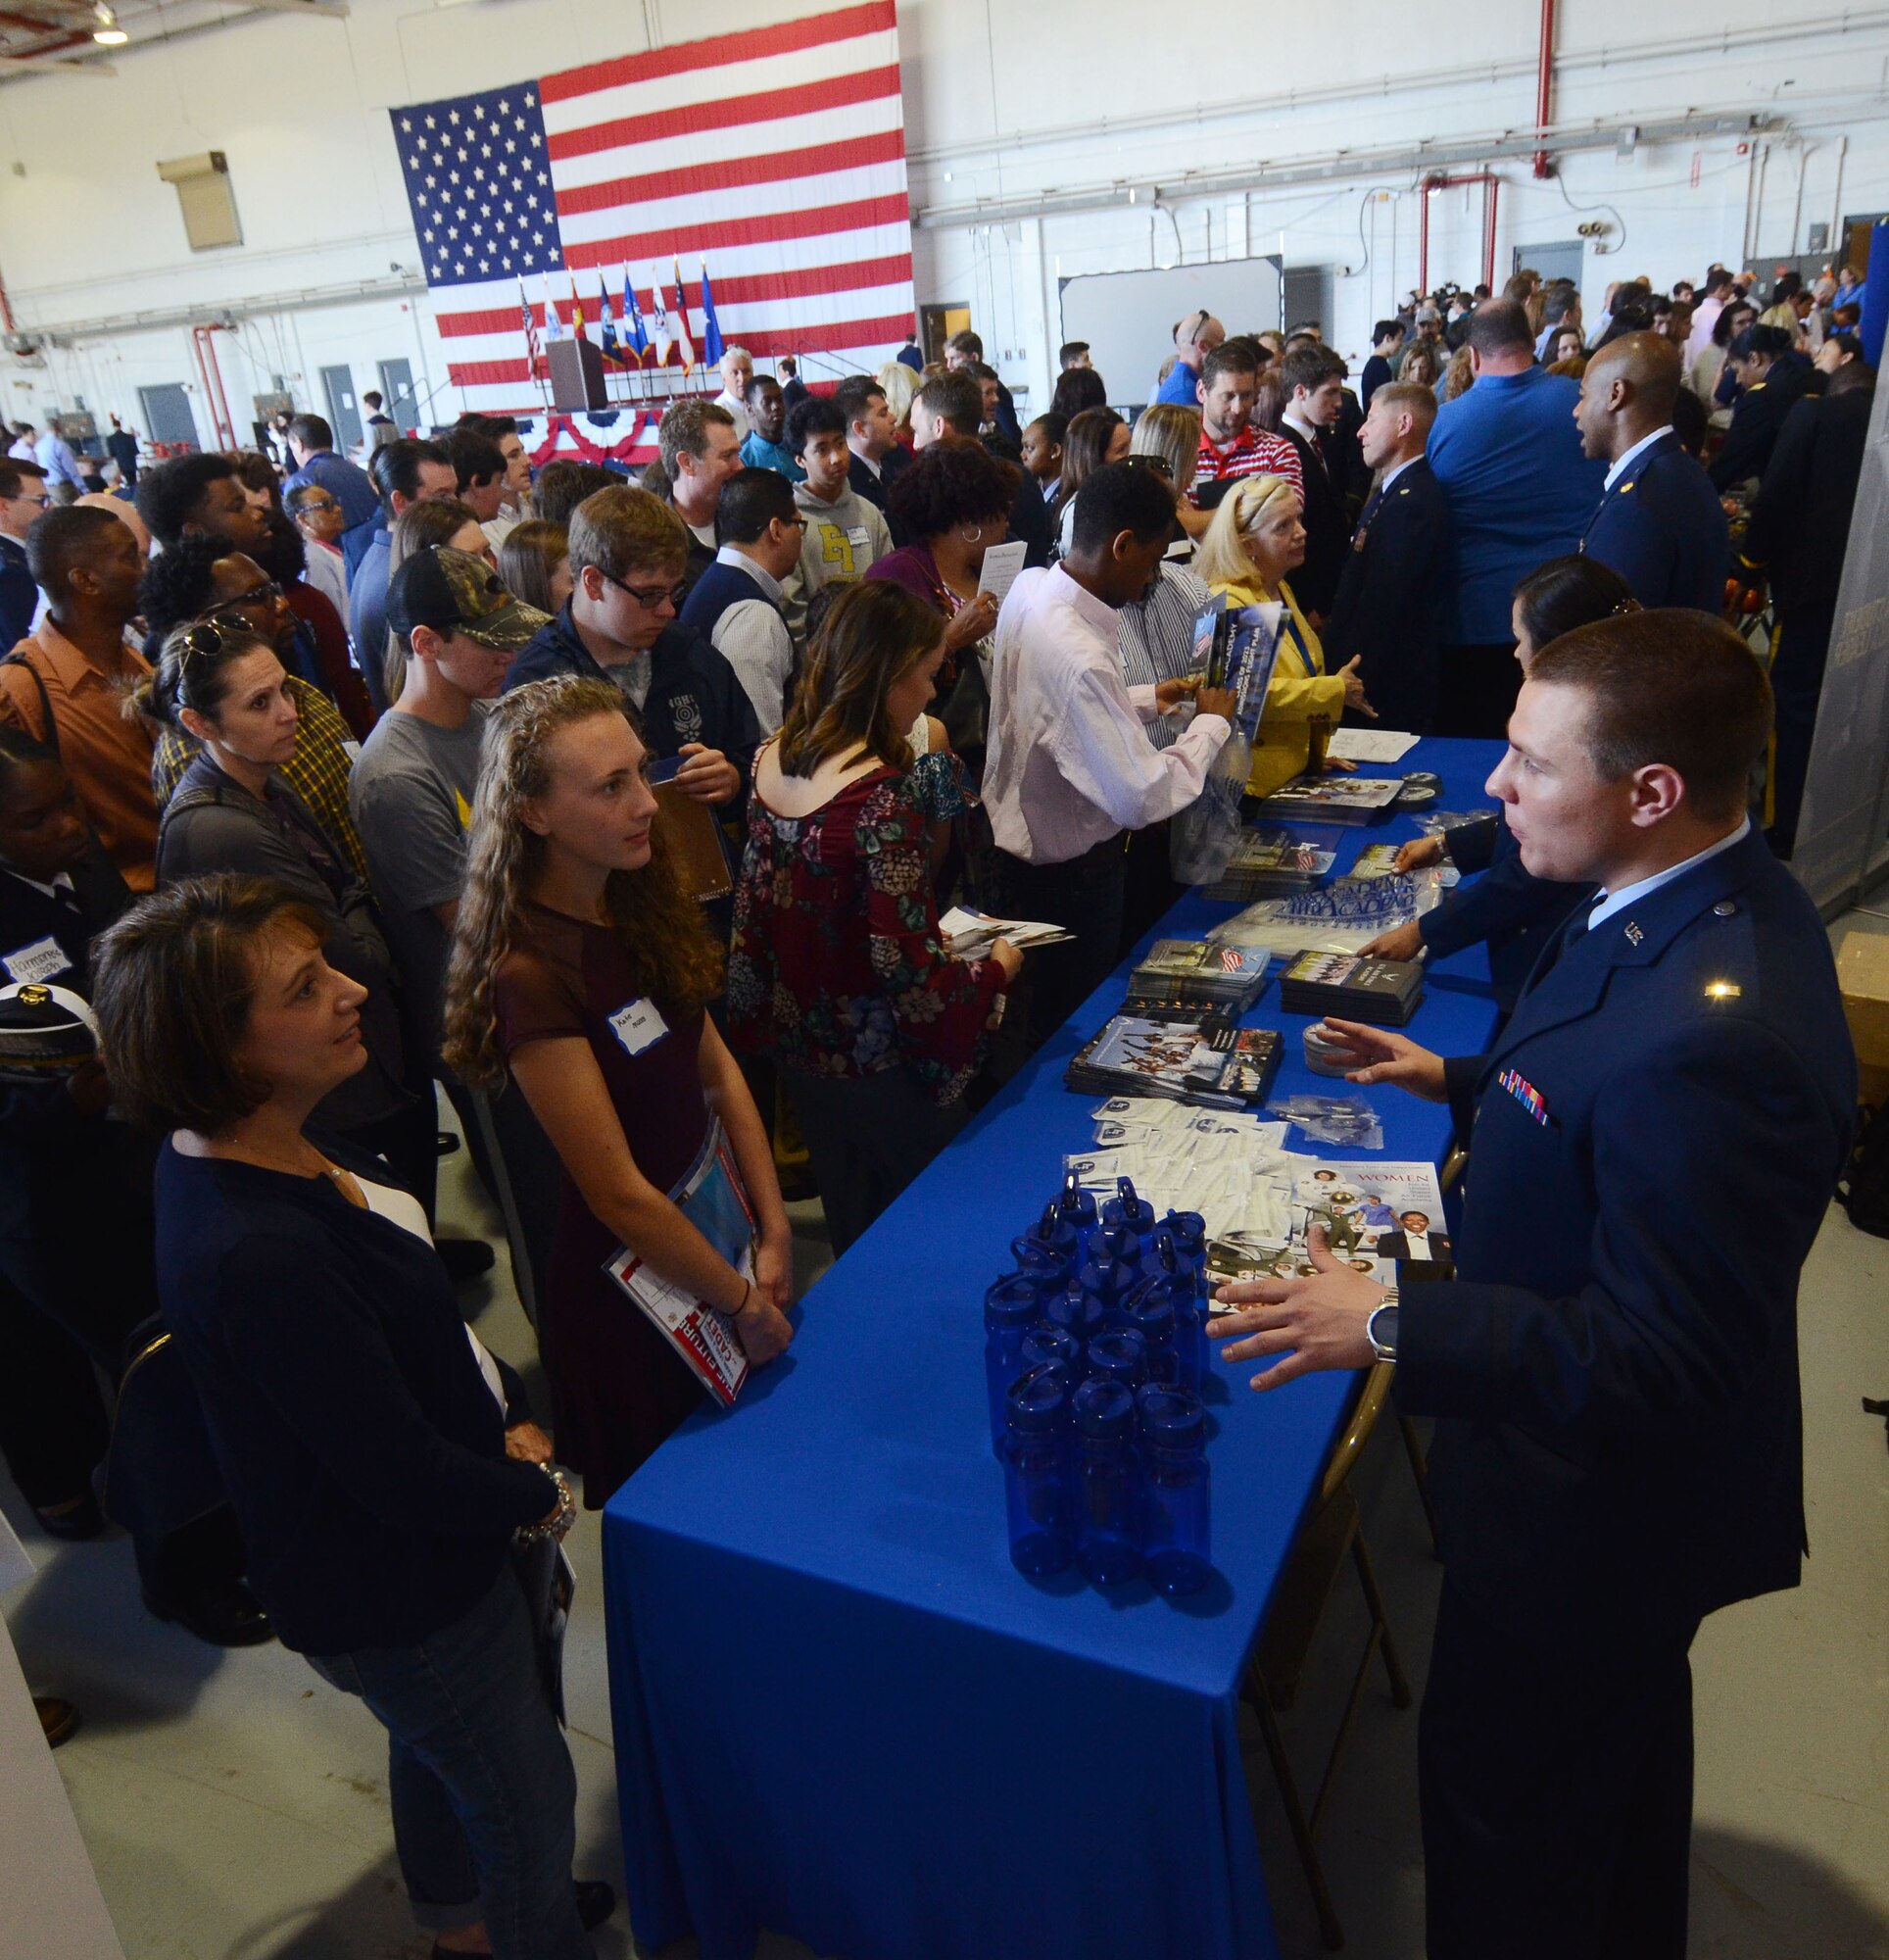 Attendees line up at a U.S. Air Force Academy information table at this year's Academy Day, held at Dobbins Air Reserve Base, Ga. April 28, 2018. U.S. military academies set up information tables for future applicants to ask questions about the application process. (U.S. Air Force photo/Don Peek)